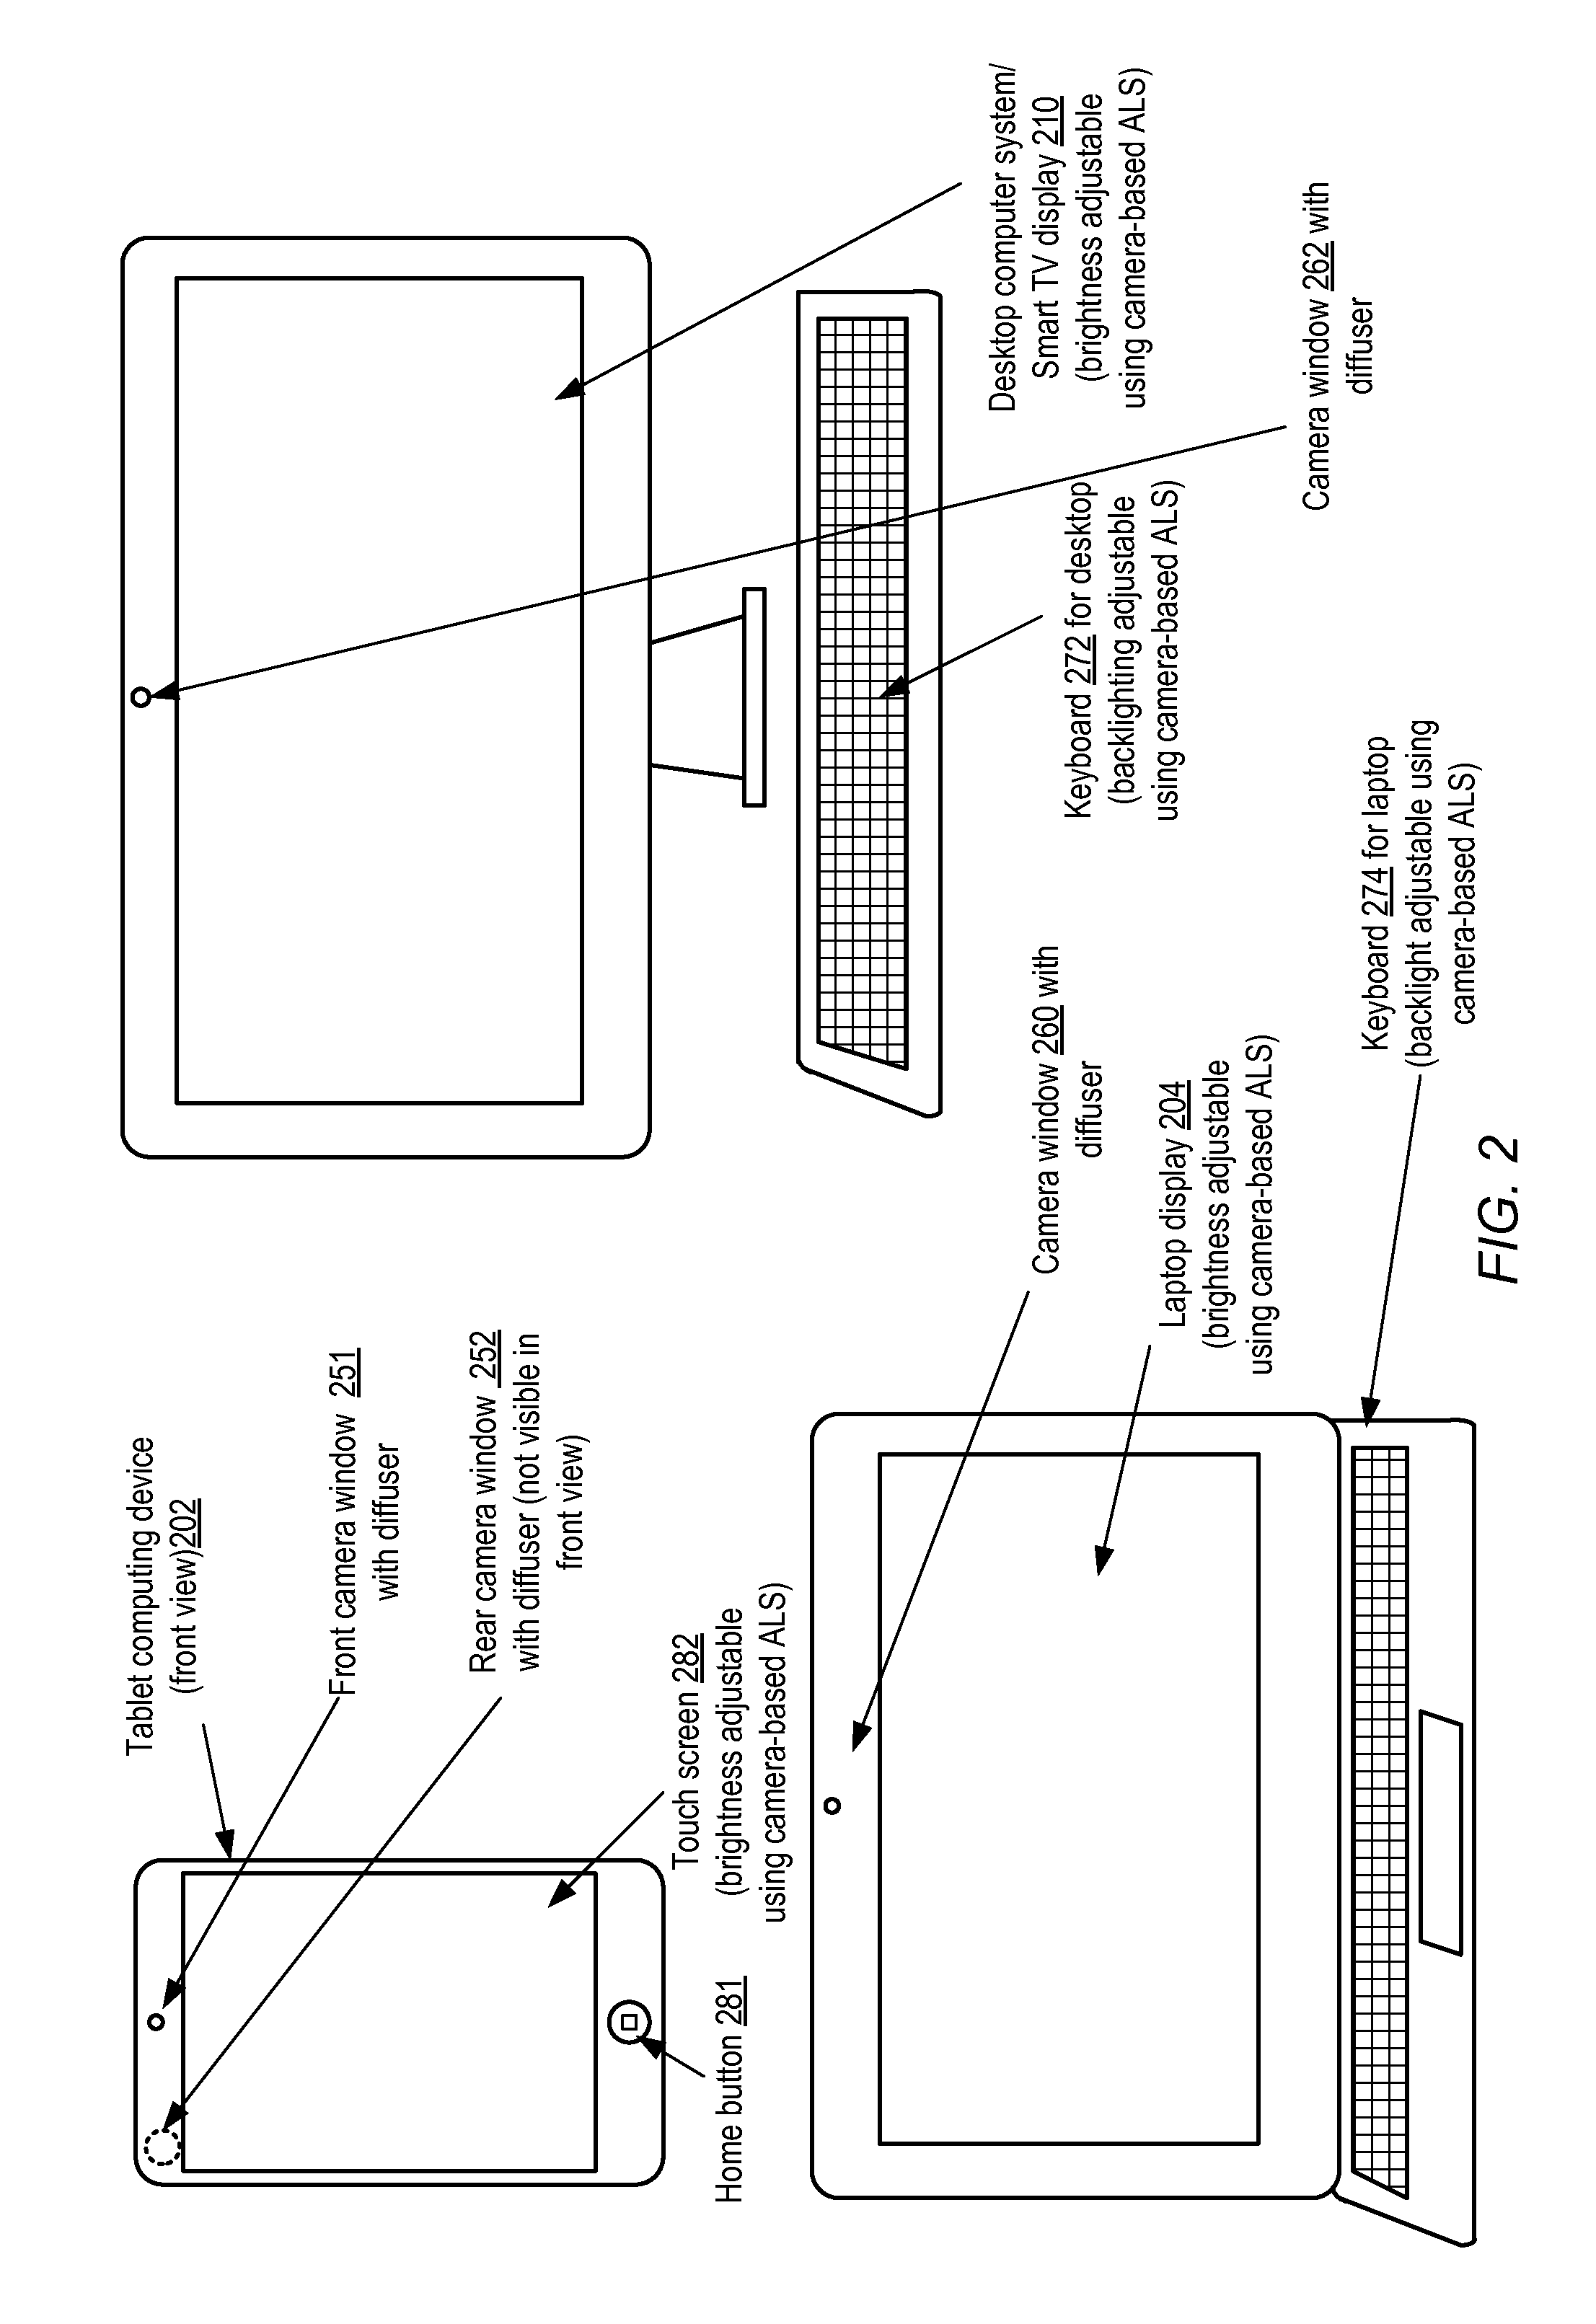 Information display using electronic diffusers